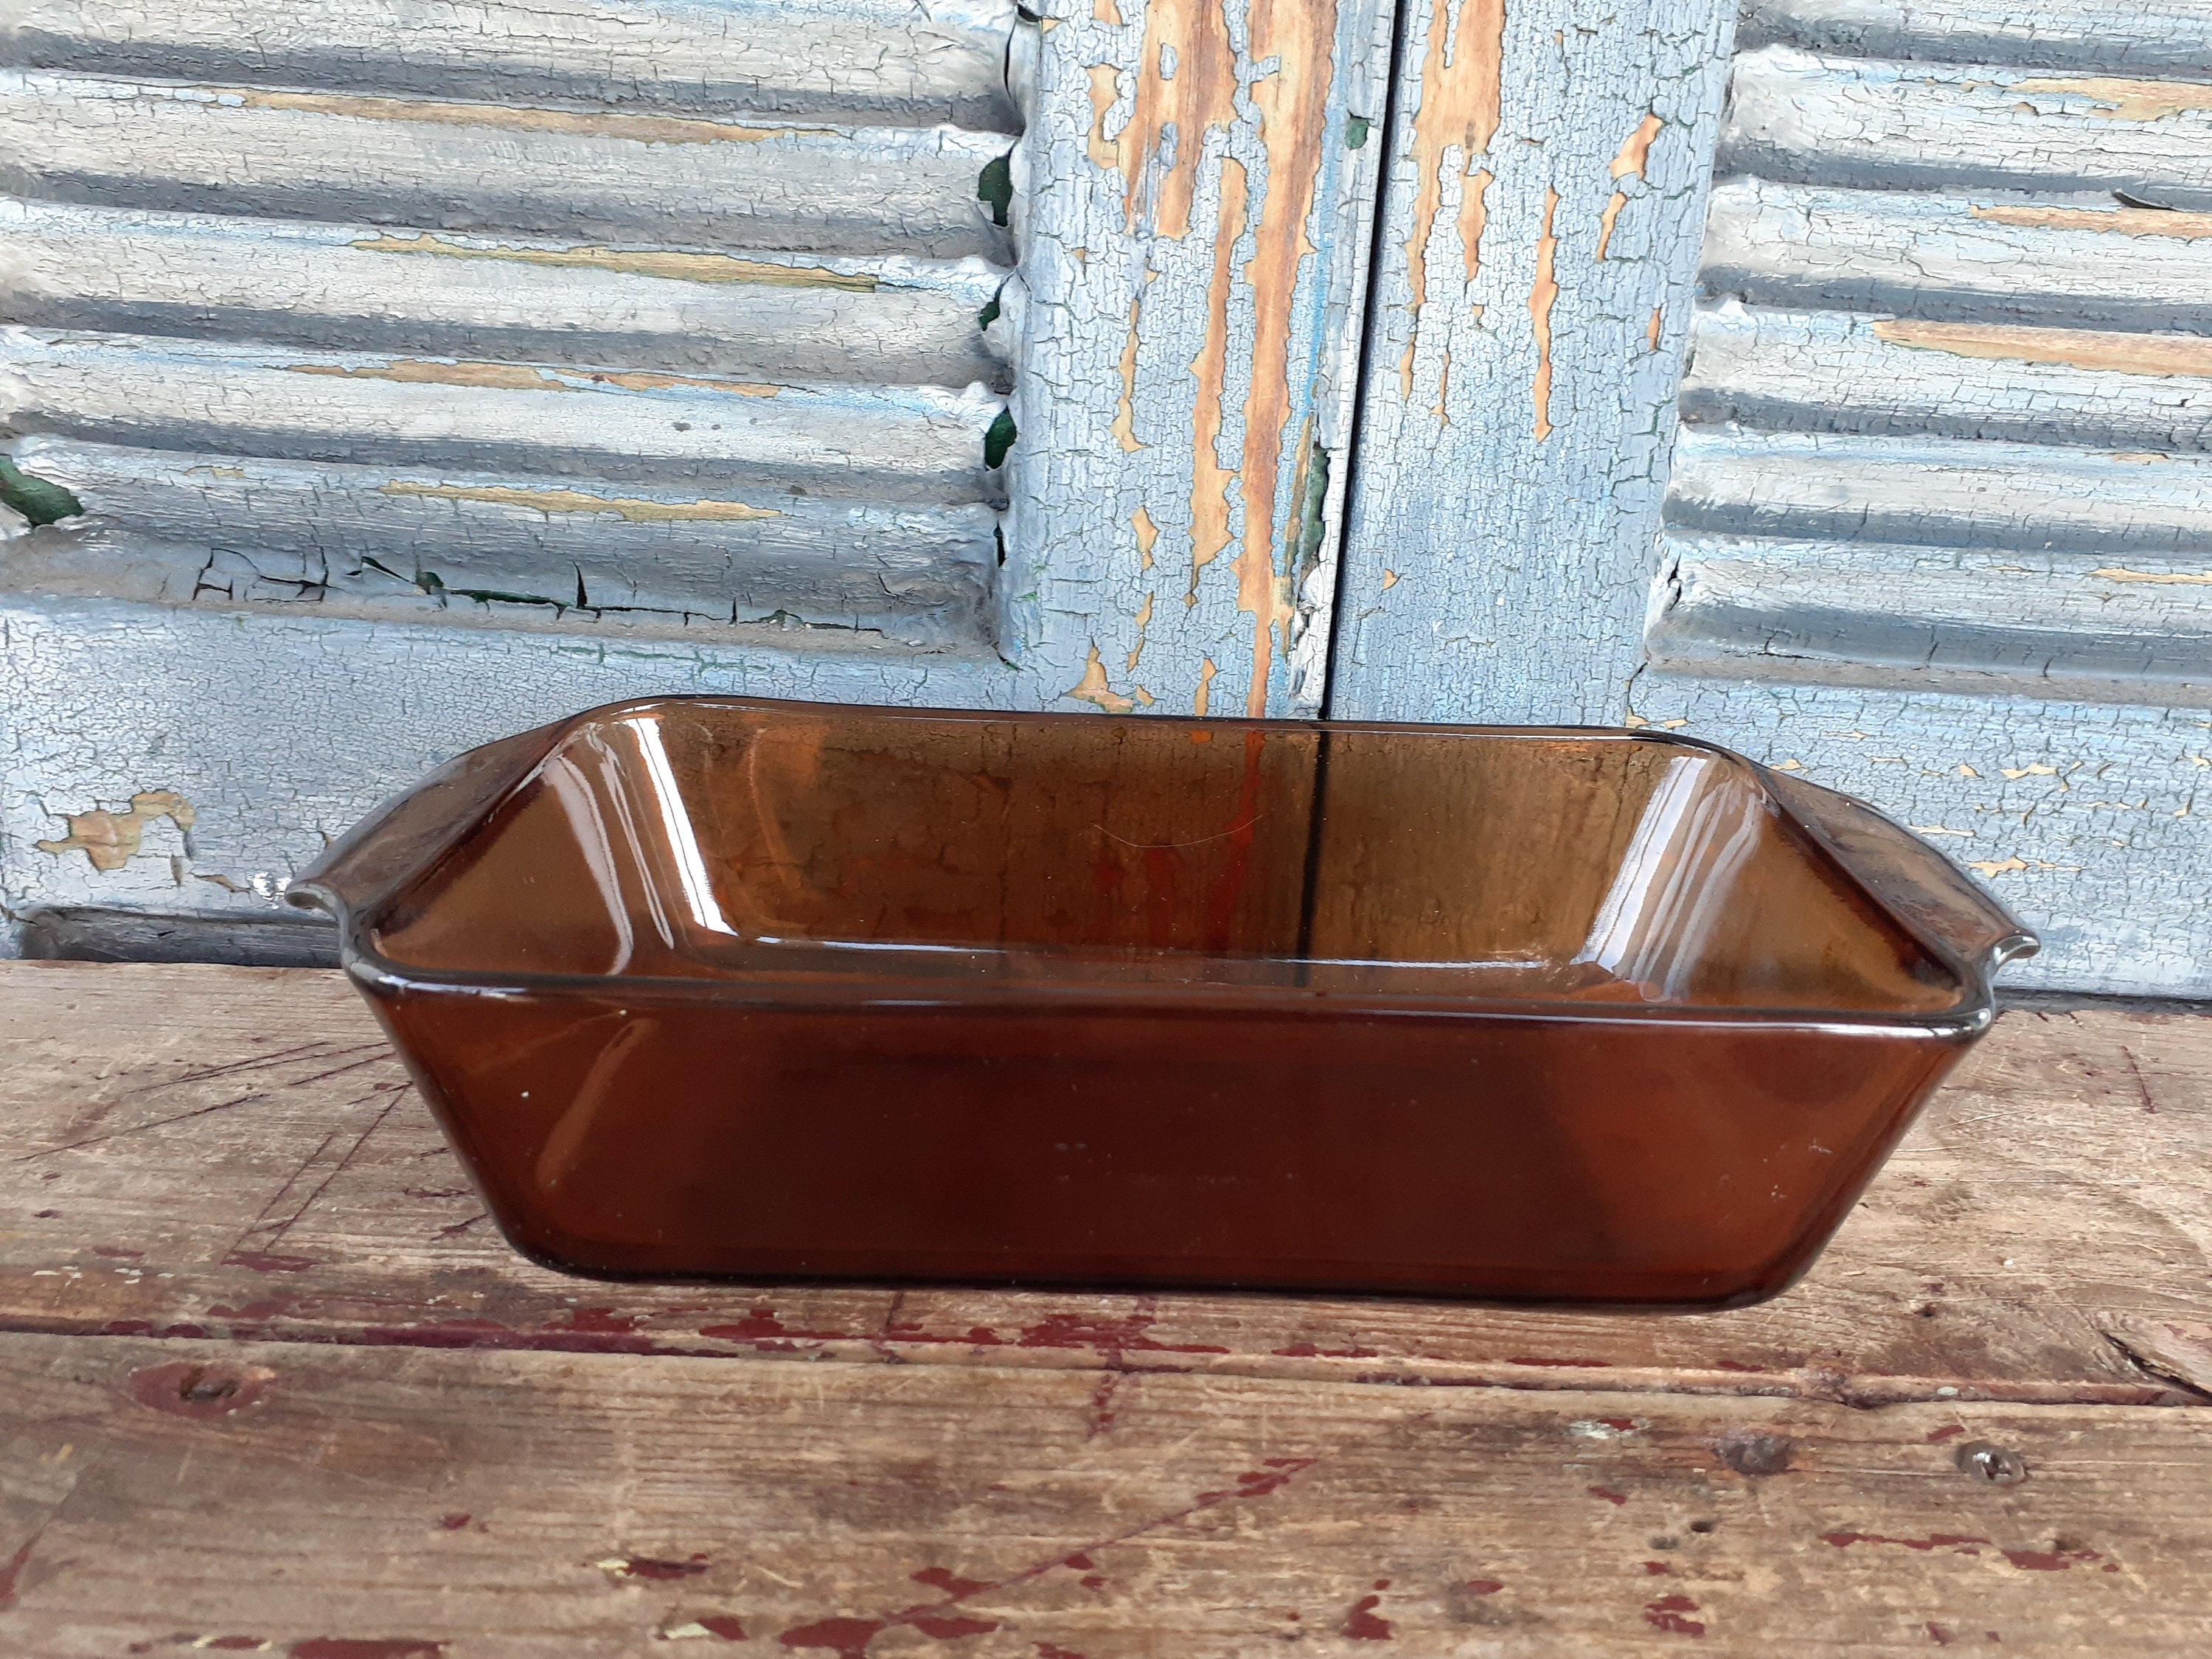 Buy Silicone Loaf Pan (Large) from Cook'n'Chic